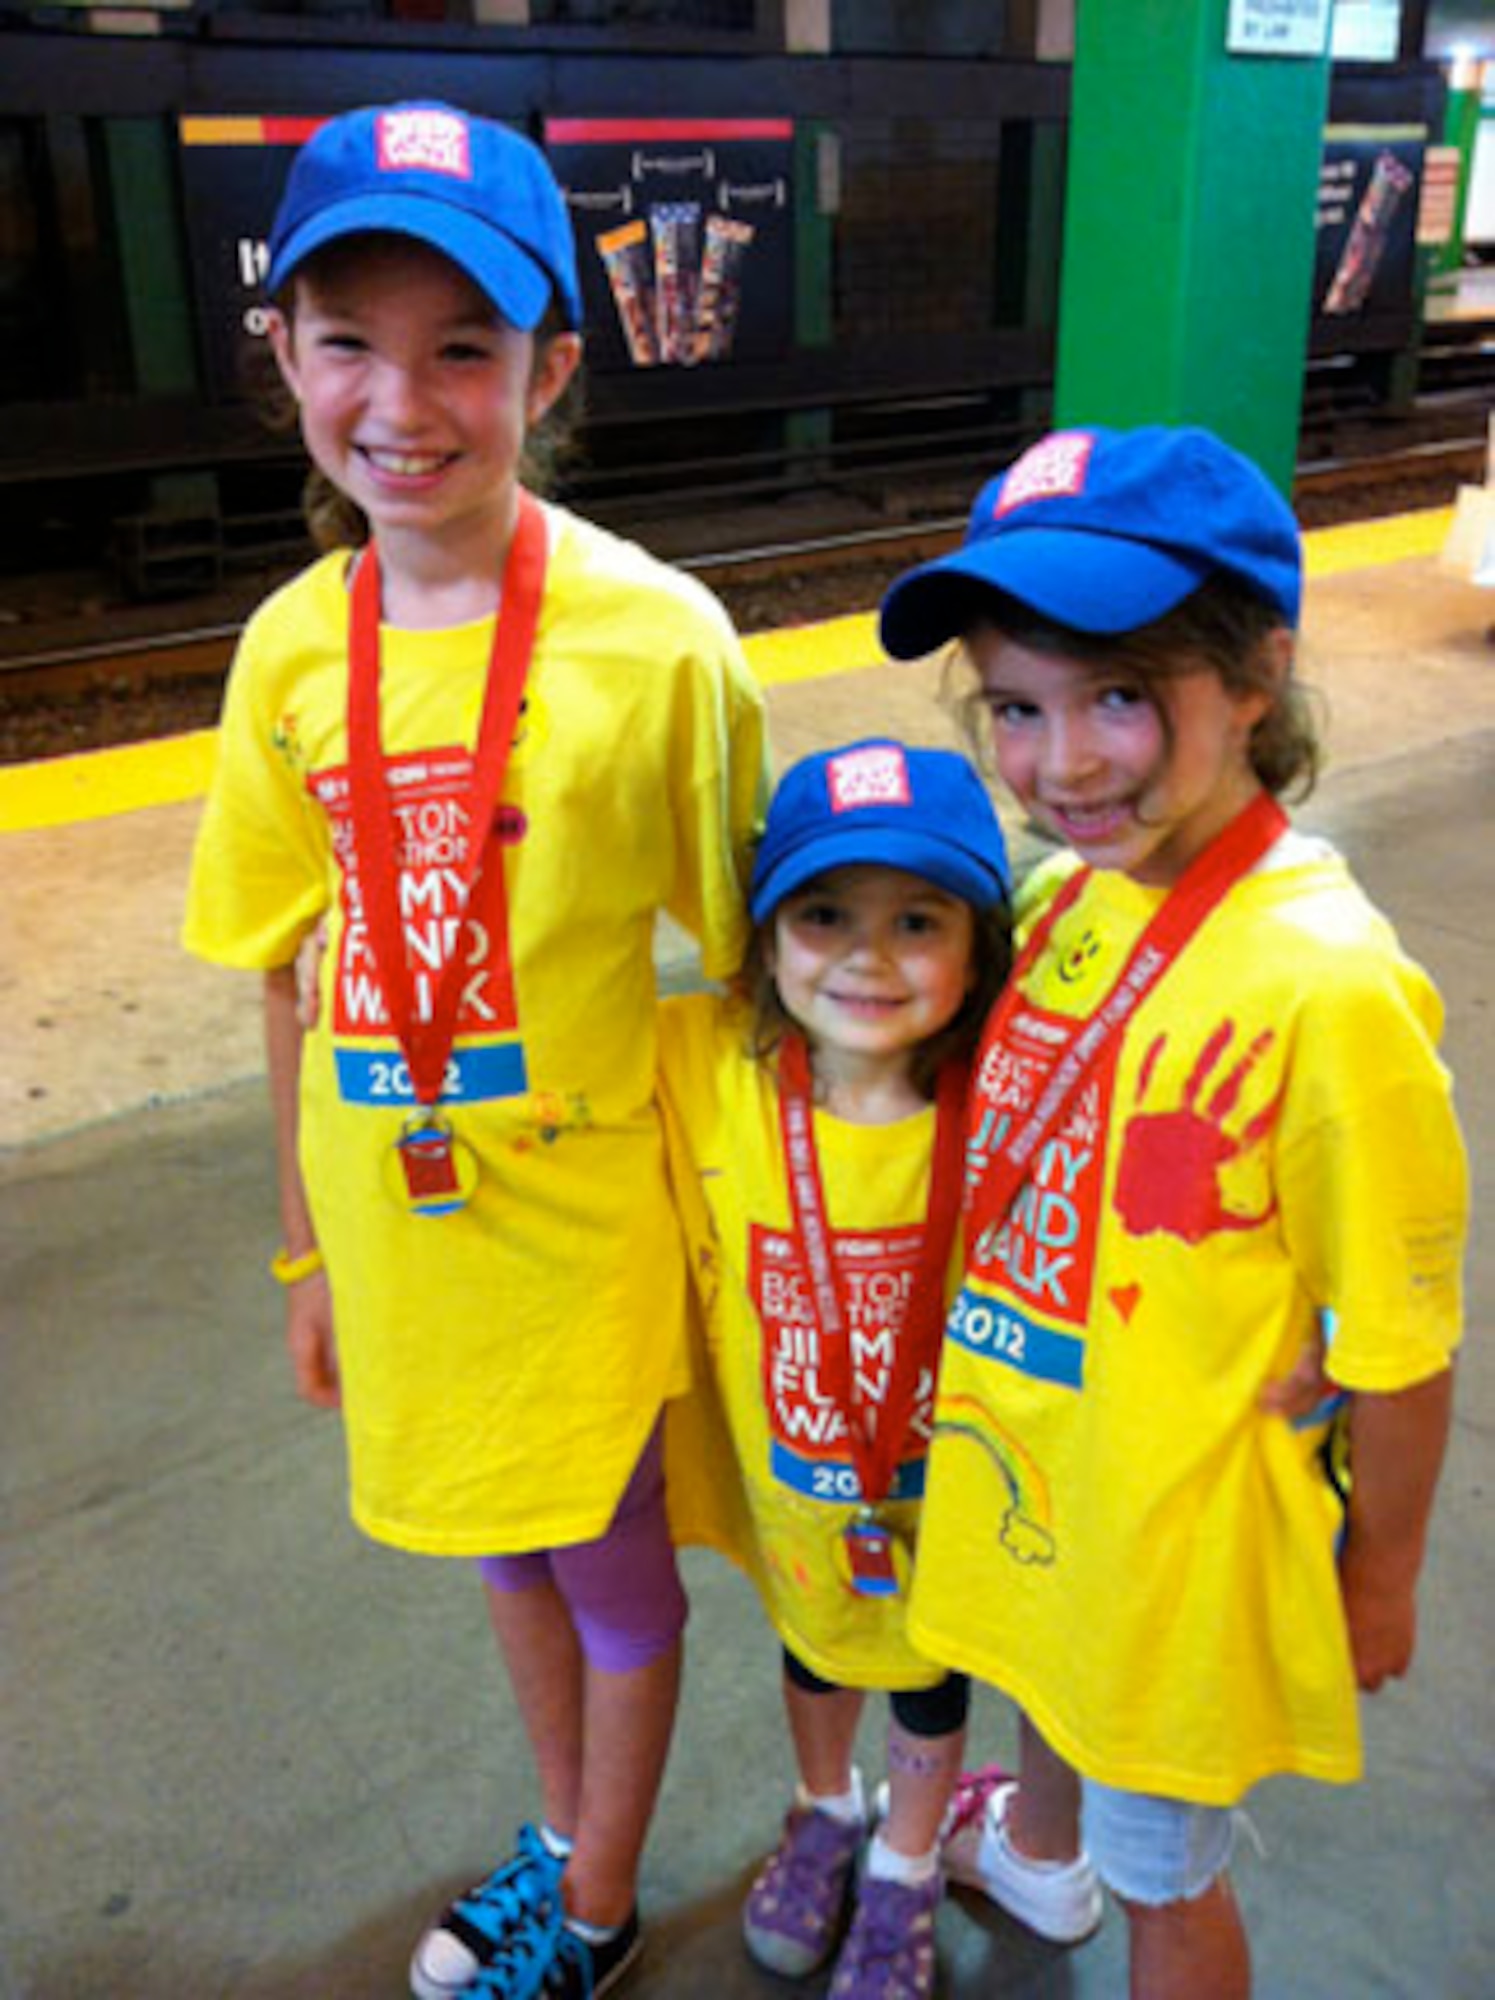 Boston - (from left to right) Jessica, Mackenzie and Amy Albert pose after walking three miles at the Jimmy Fund Walk in Boston Sep. 9. More than 7,500 walkers participated in the event that supports the fight against cancer in children and adults at Boston’s Dana-Farber Cancer Institute. (Courtesy photo)